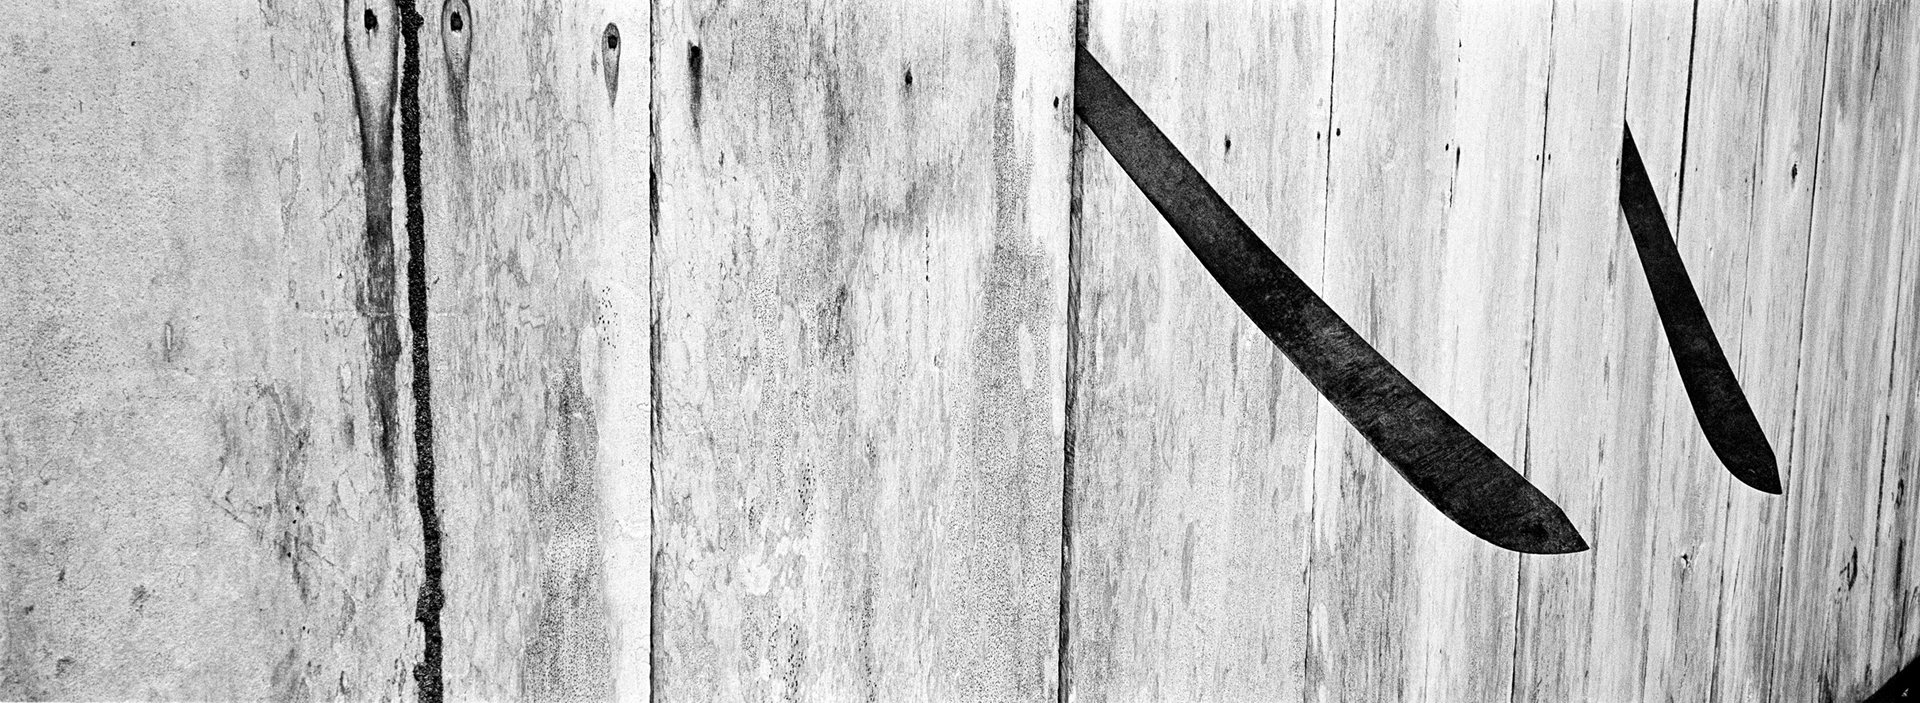 Machetes protrude from the wall of a wooden house in Puerto Nariño, a small town in the Colombian Amazon region. Many victims of forced disappearance in Colombia have been killed and dismembered using machetes and chainsaws.